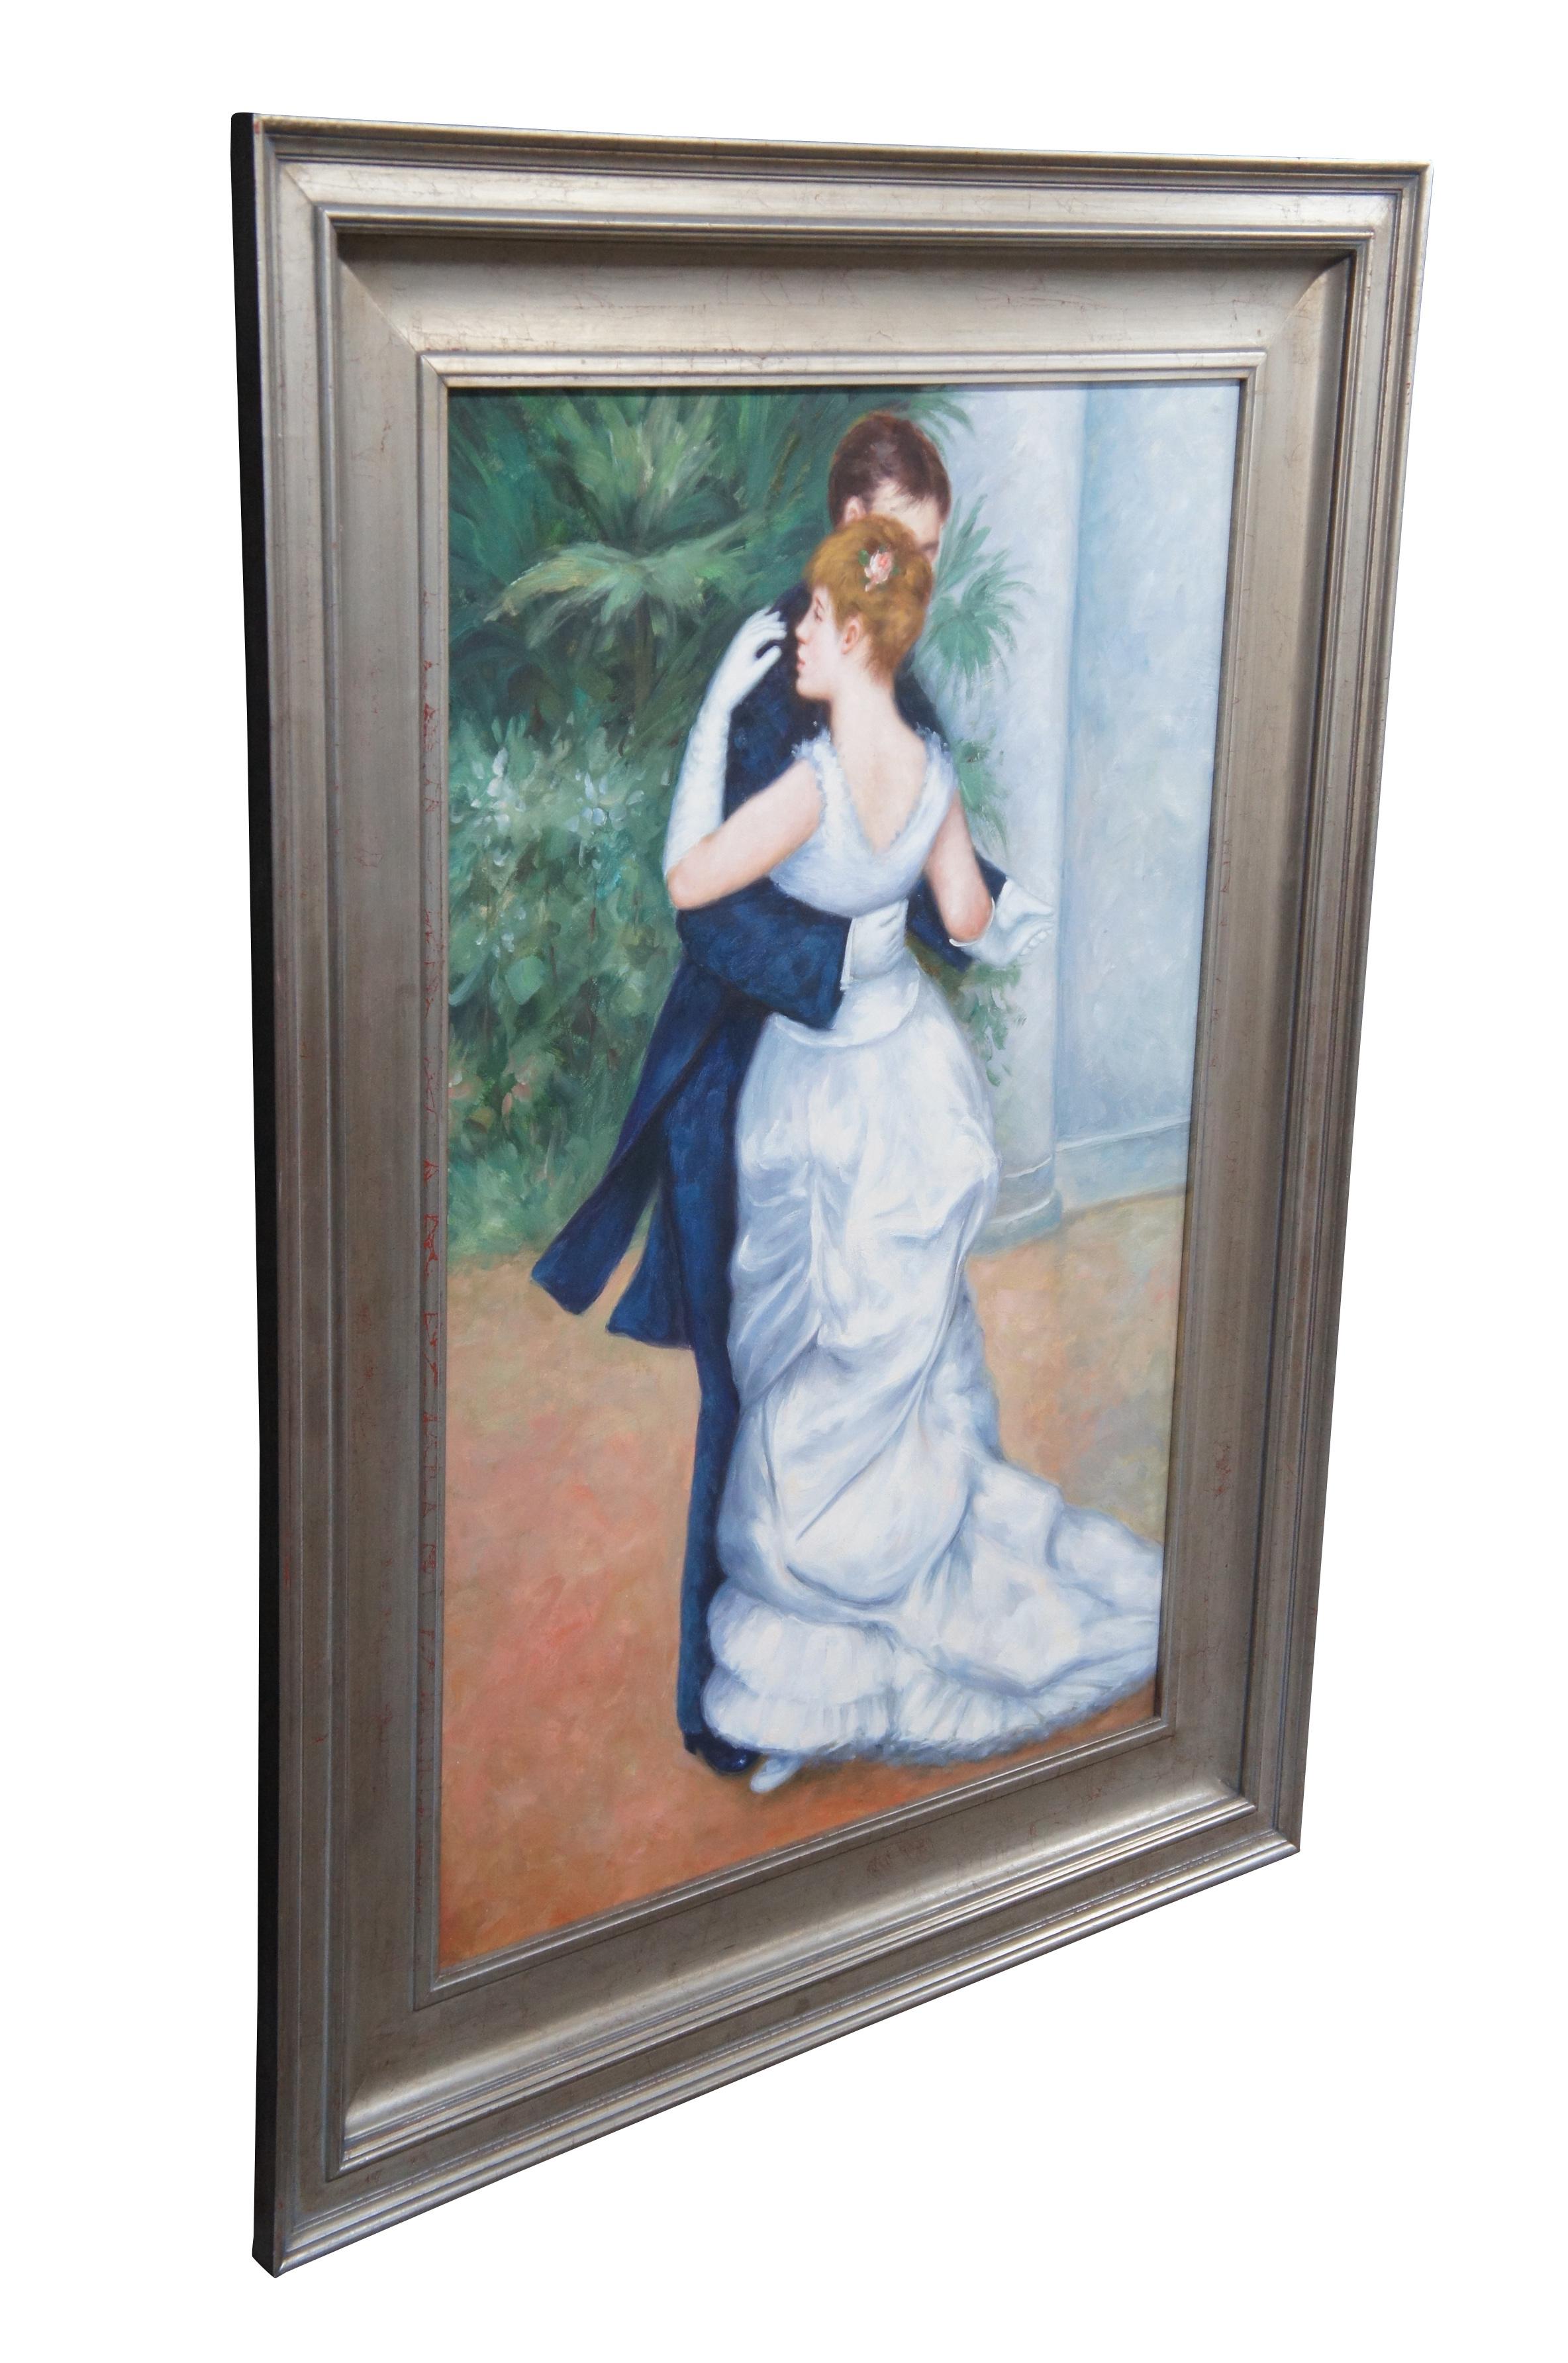 Vintage oil painting on canvas after Pierre Auguste Renoir, titled Dance in the City. 

Dance in the City is a painting created by the French artist Pierre-Auguste Renoir. Completed in 1883, the artwork is currently housed in the collection of the